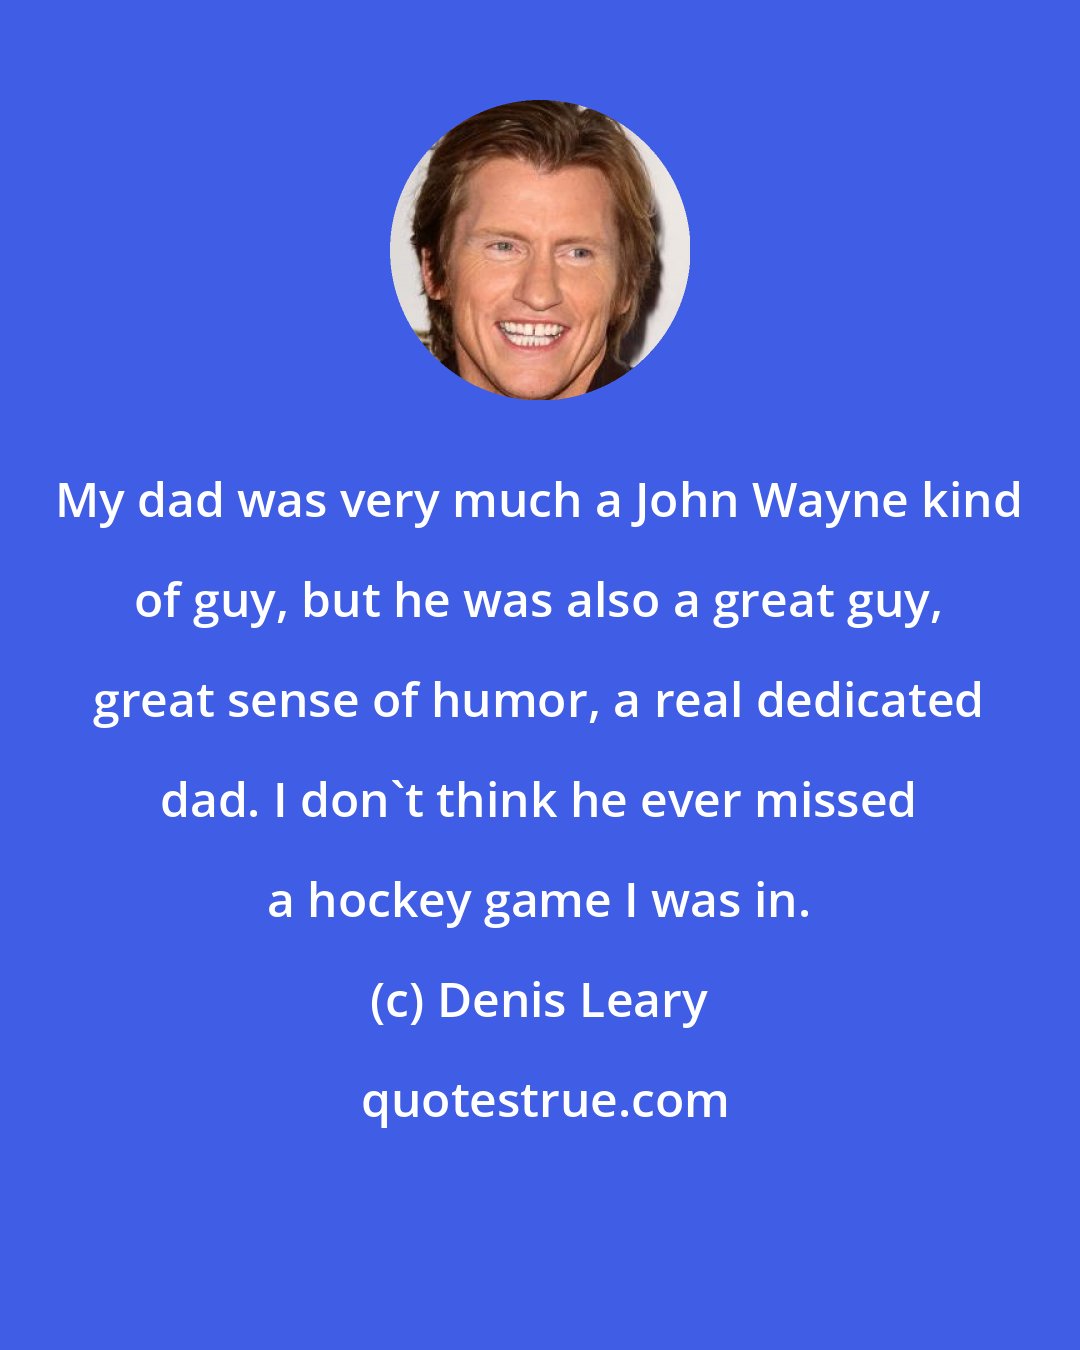 Denis Leary: My dad was very much a John Wayne kind of guy, but he was also a great guy, great sense of humor, a real dedicated dad. I don't think he ever missed a hockey game I was in.